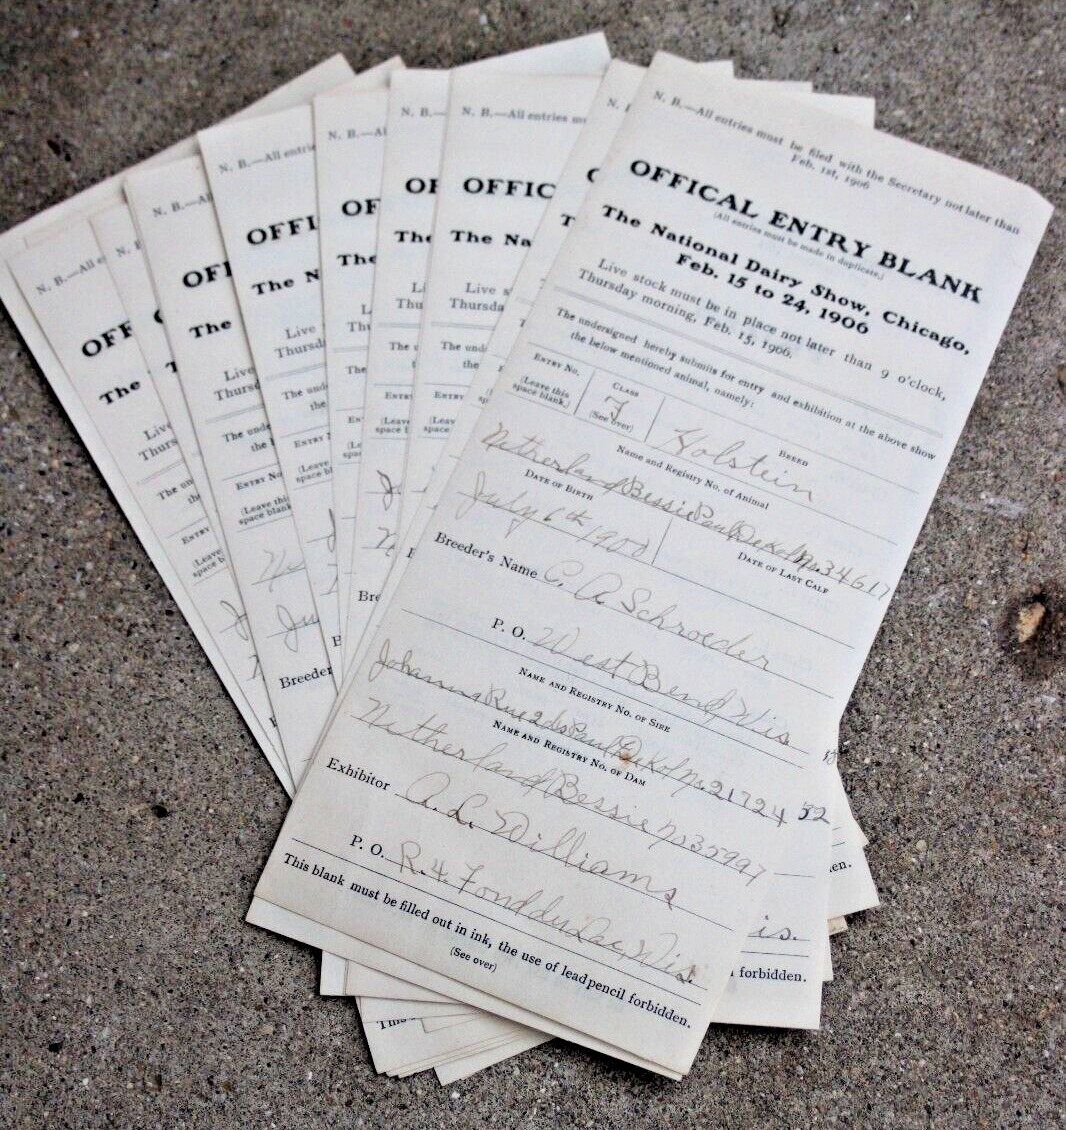 1906 National Dairy Show Chicago Lot of 14 Official Entry Blanks Used Holstein